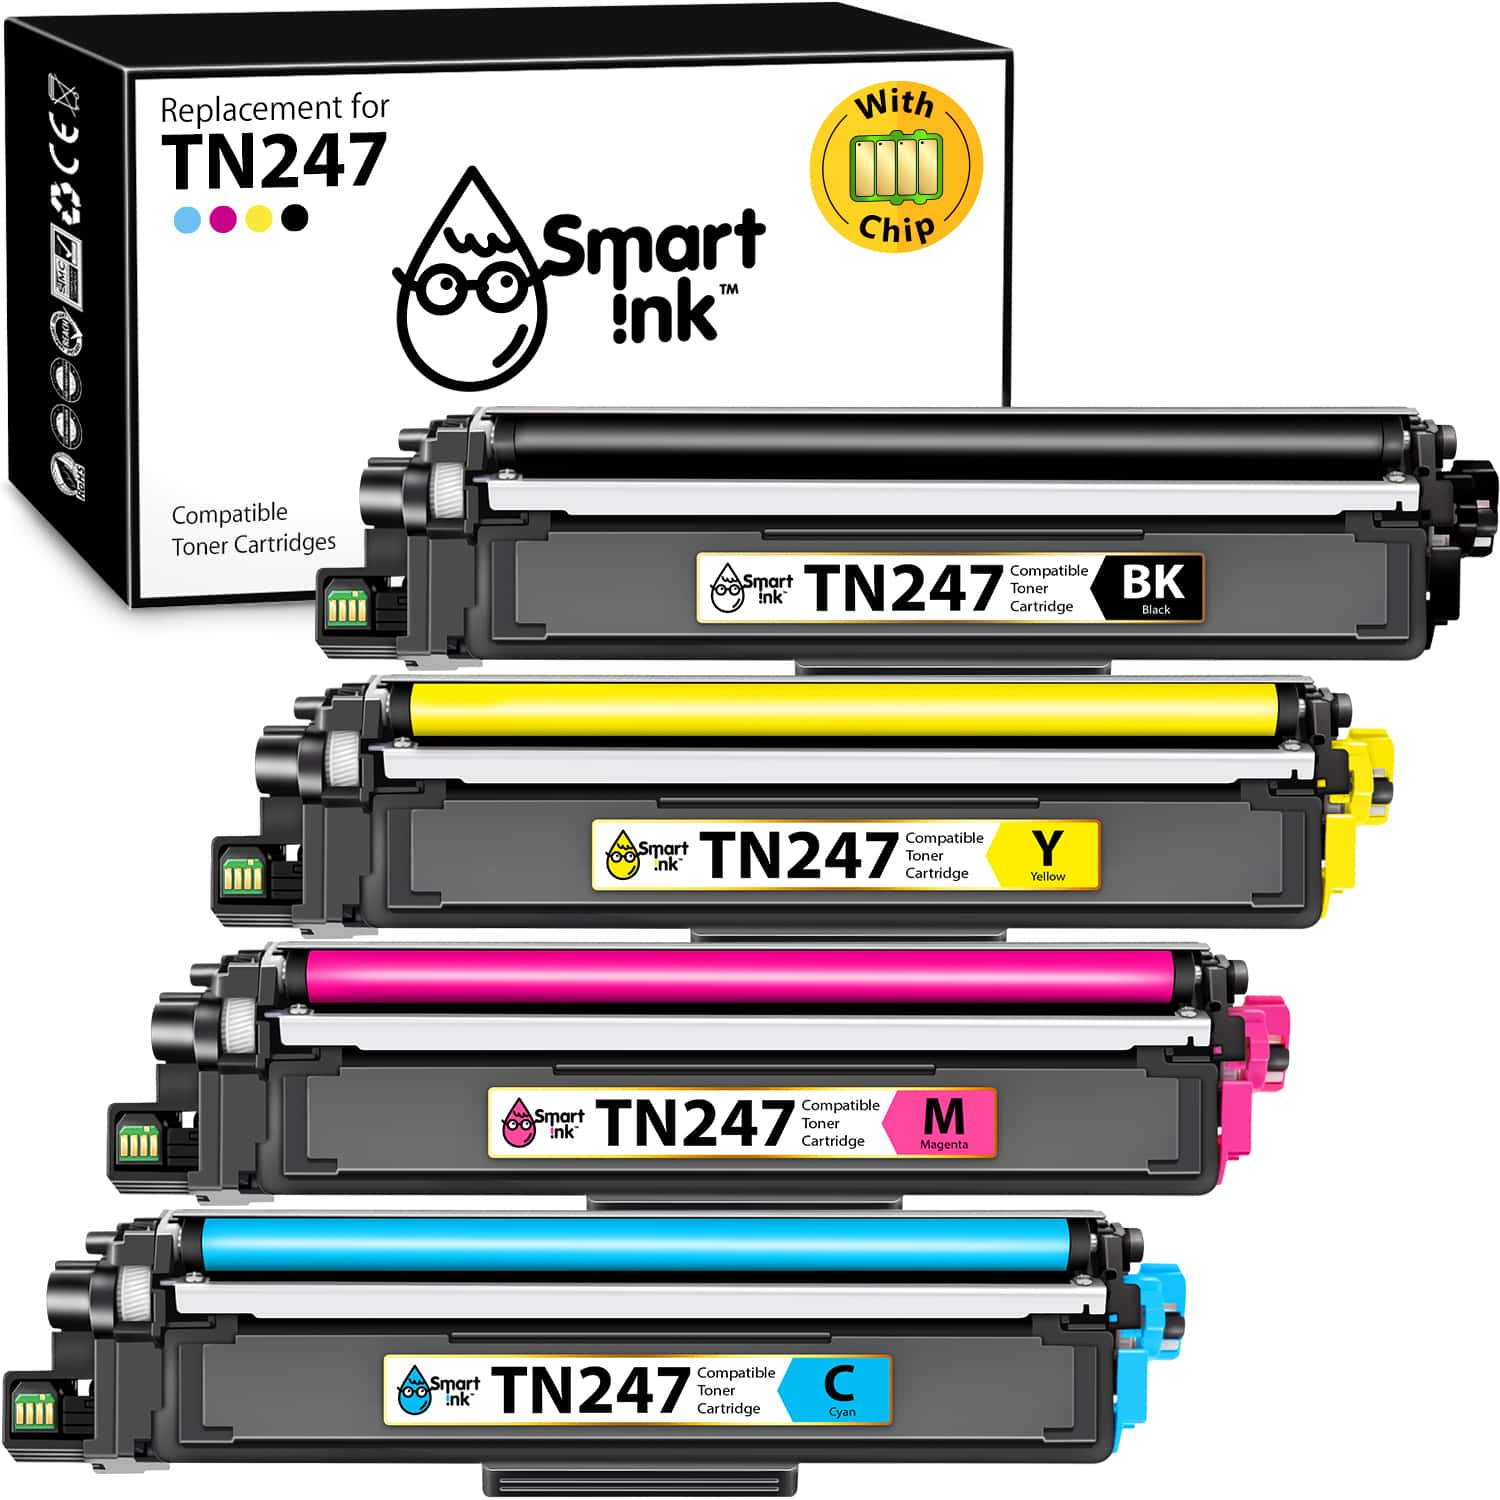 Compatible Toner Cartridge Replacement for Brother TN 247 (4 pack), Smart  Ink